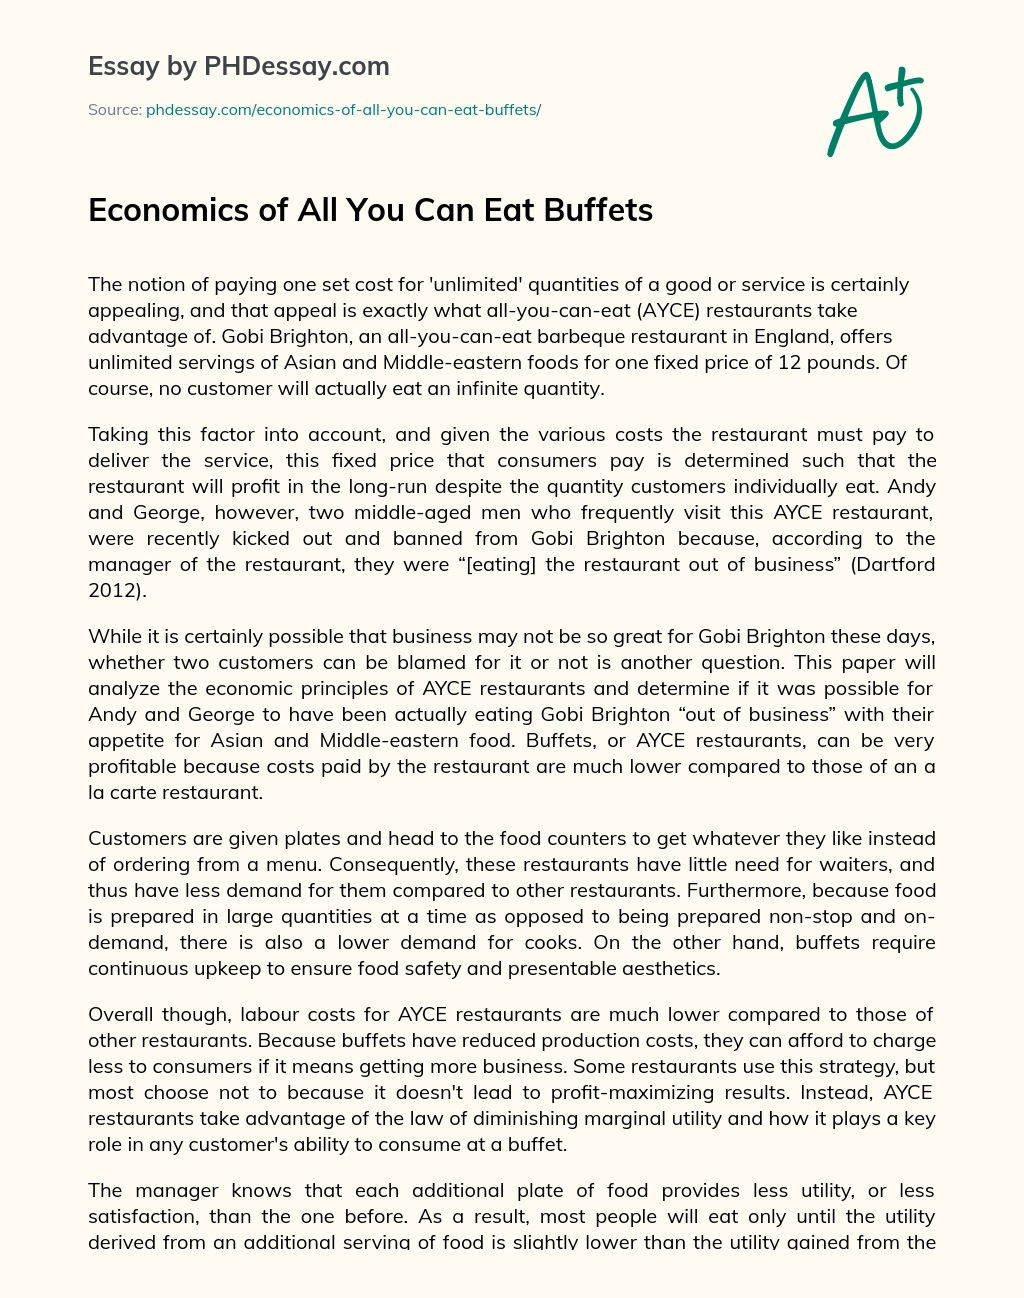 Economics of All You Can Eat Buffets essay